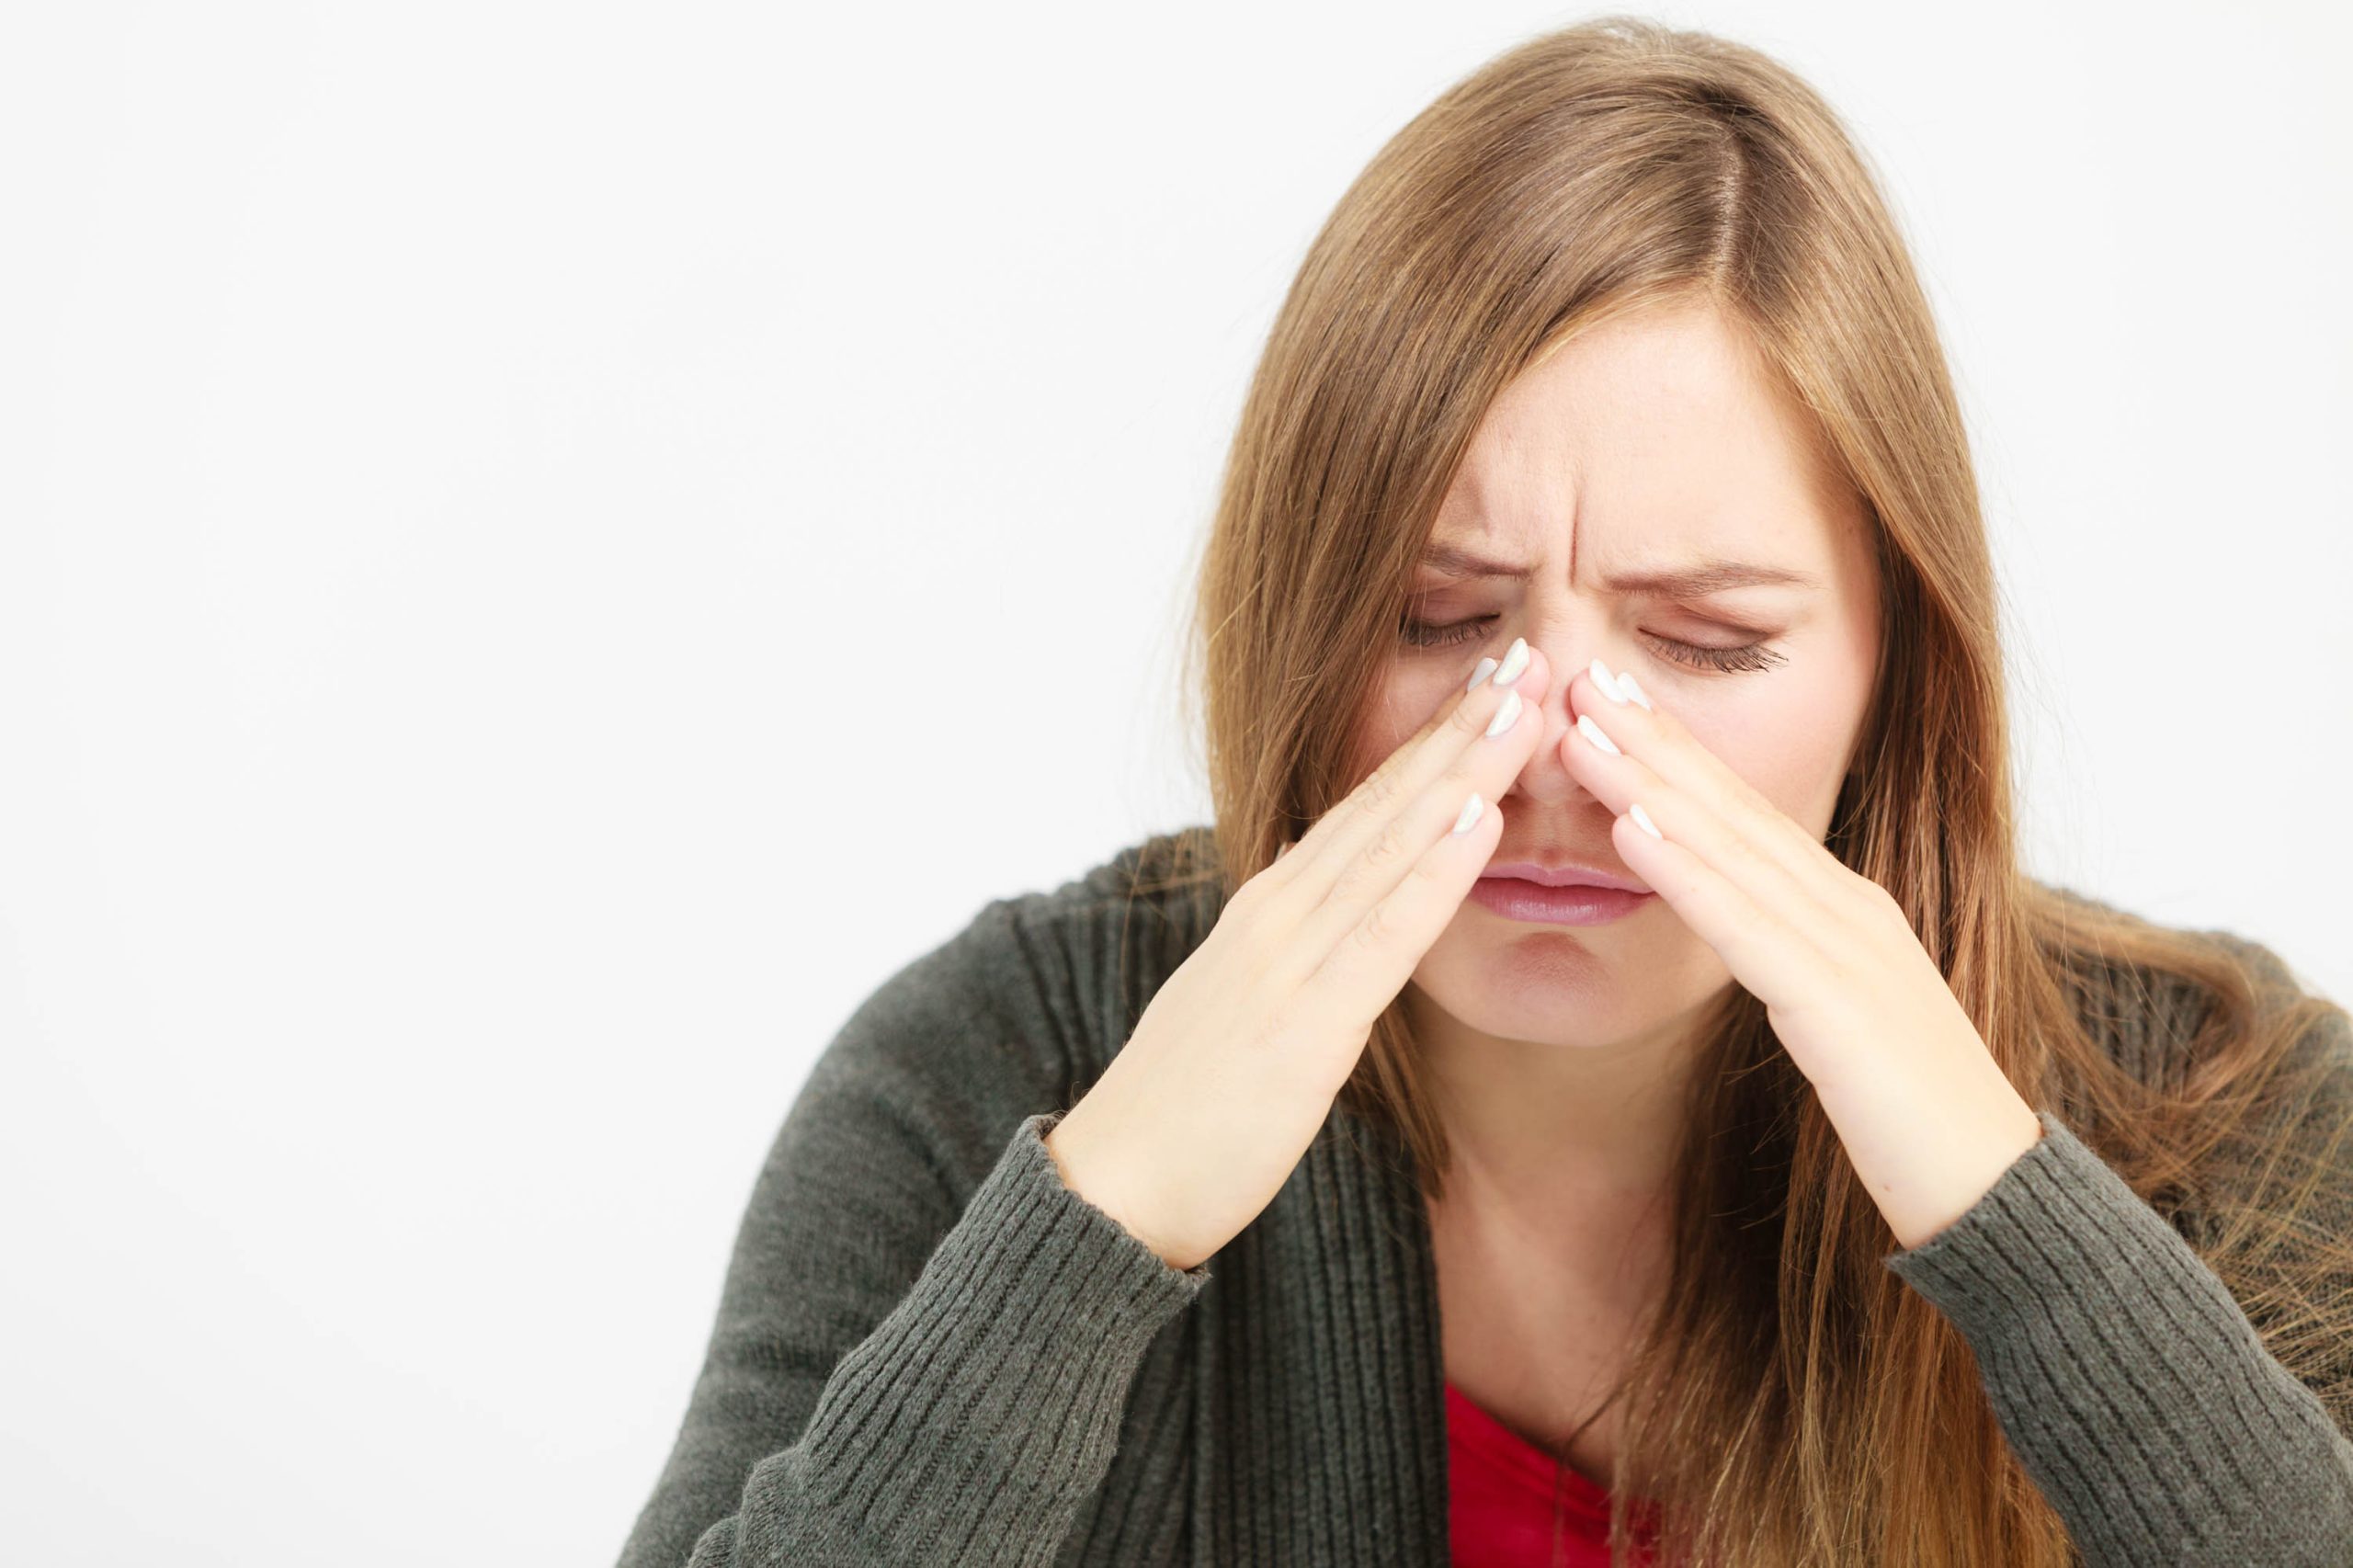 Home remedies for relieving sinus pressure